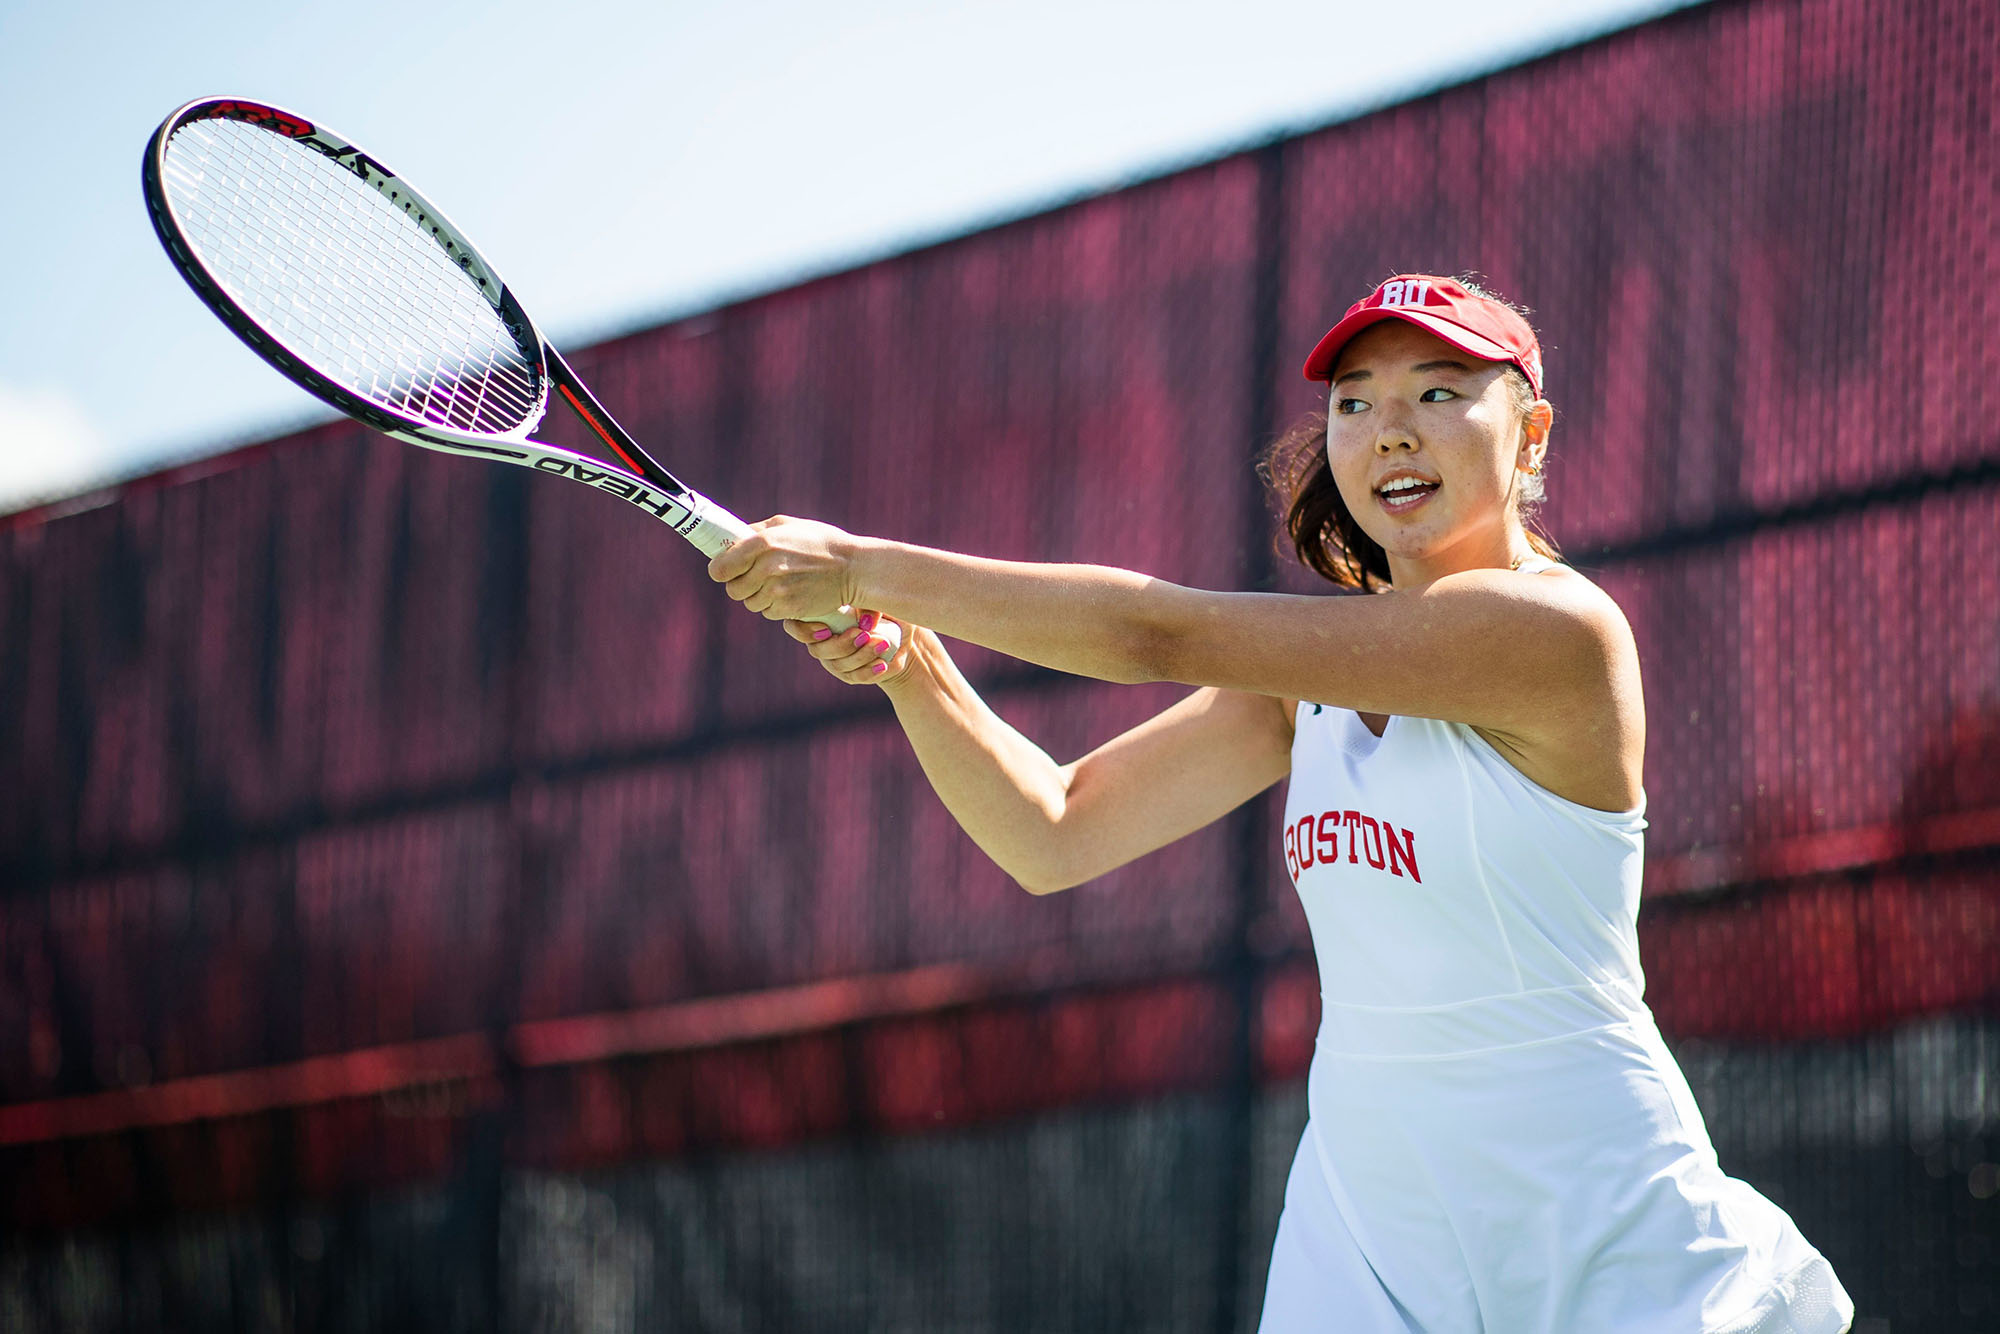 Action photo of BU tennis player Emily Kim. She is wearing a white tennis dress that reads "Boston" in red letters over the chest area and a red BU visor hat. She is captured mid-swing on the tennis court.